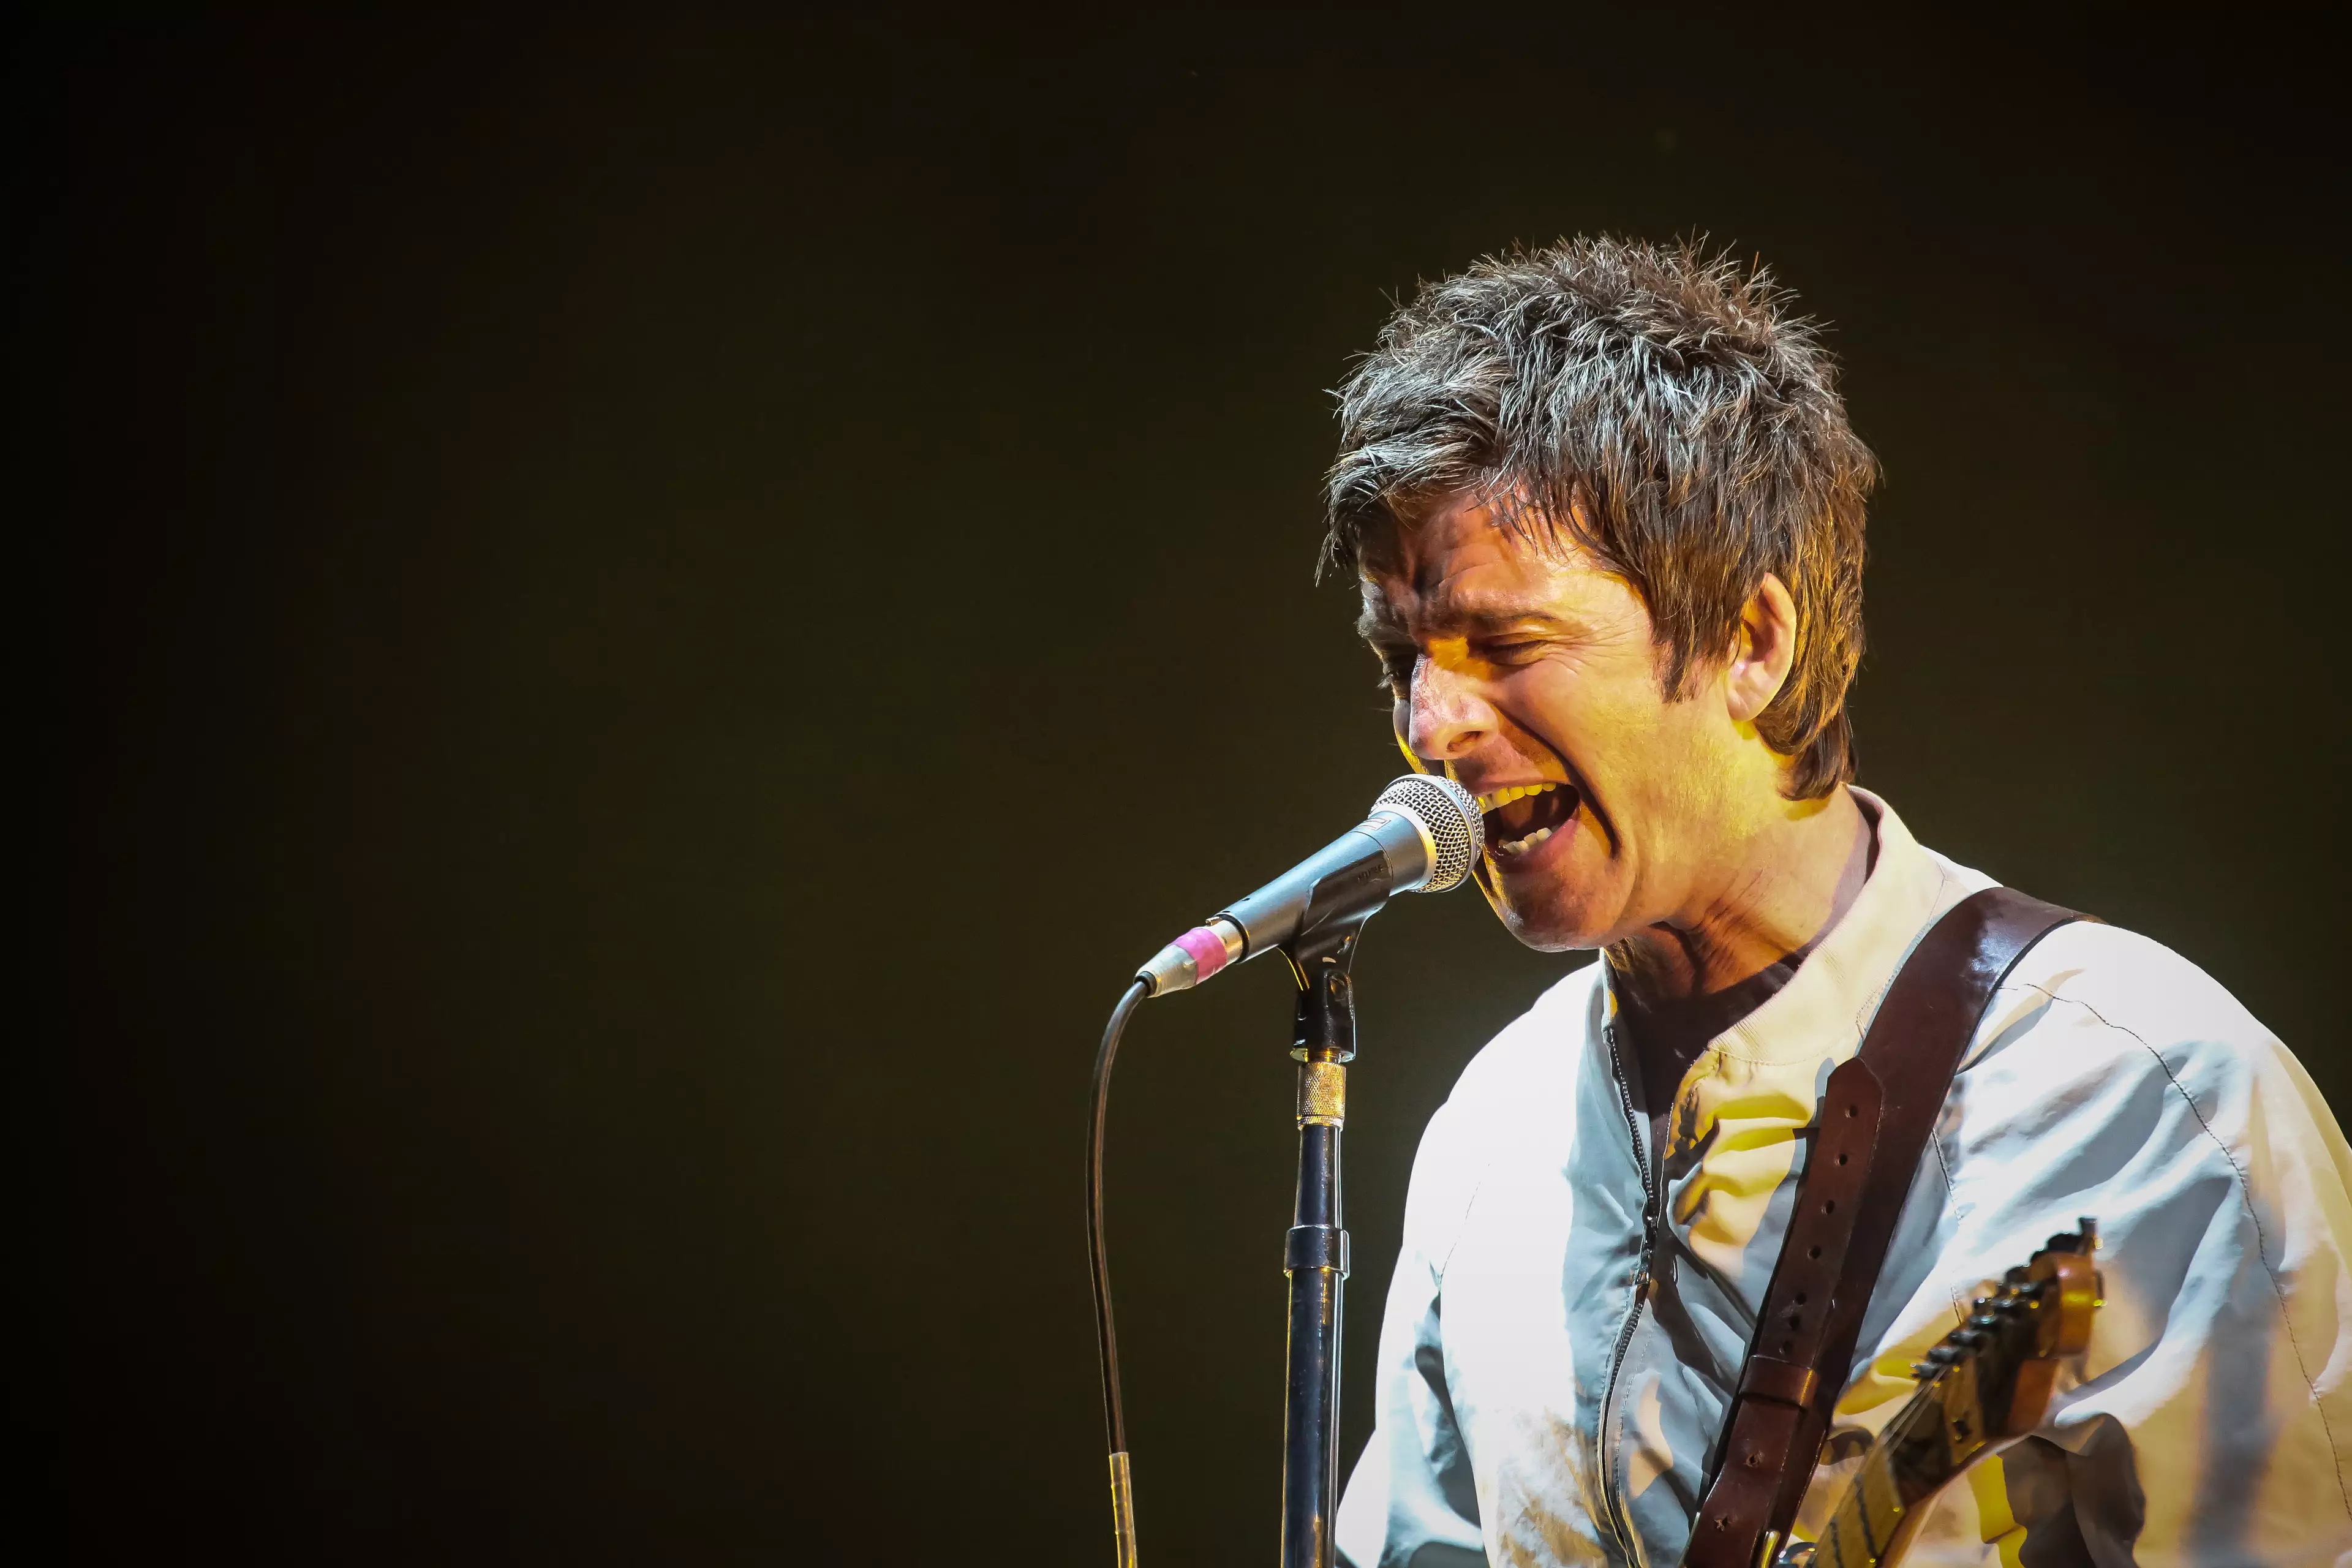 Noel Gallagher performing live